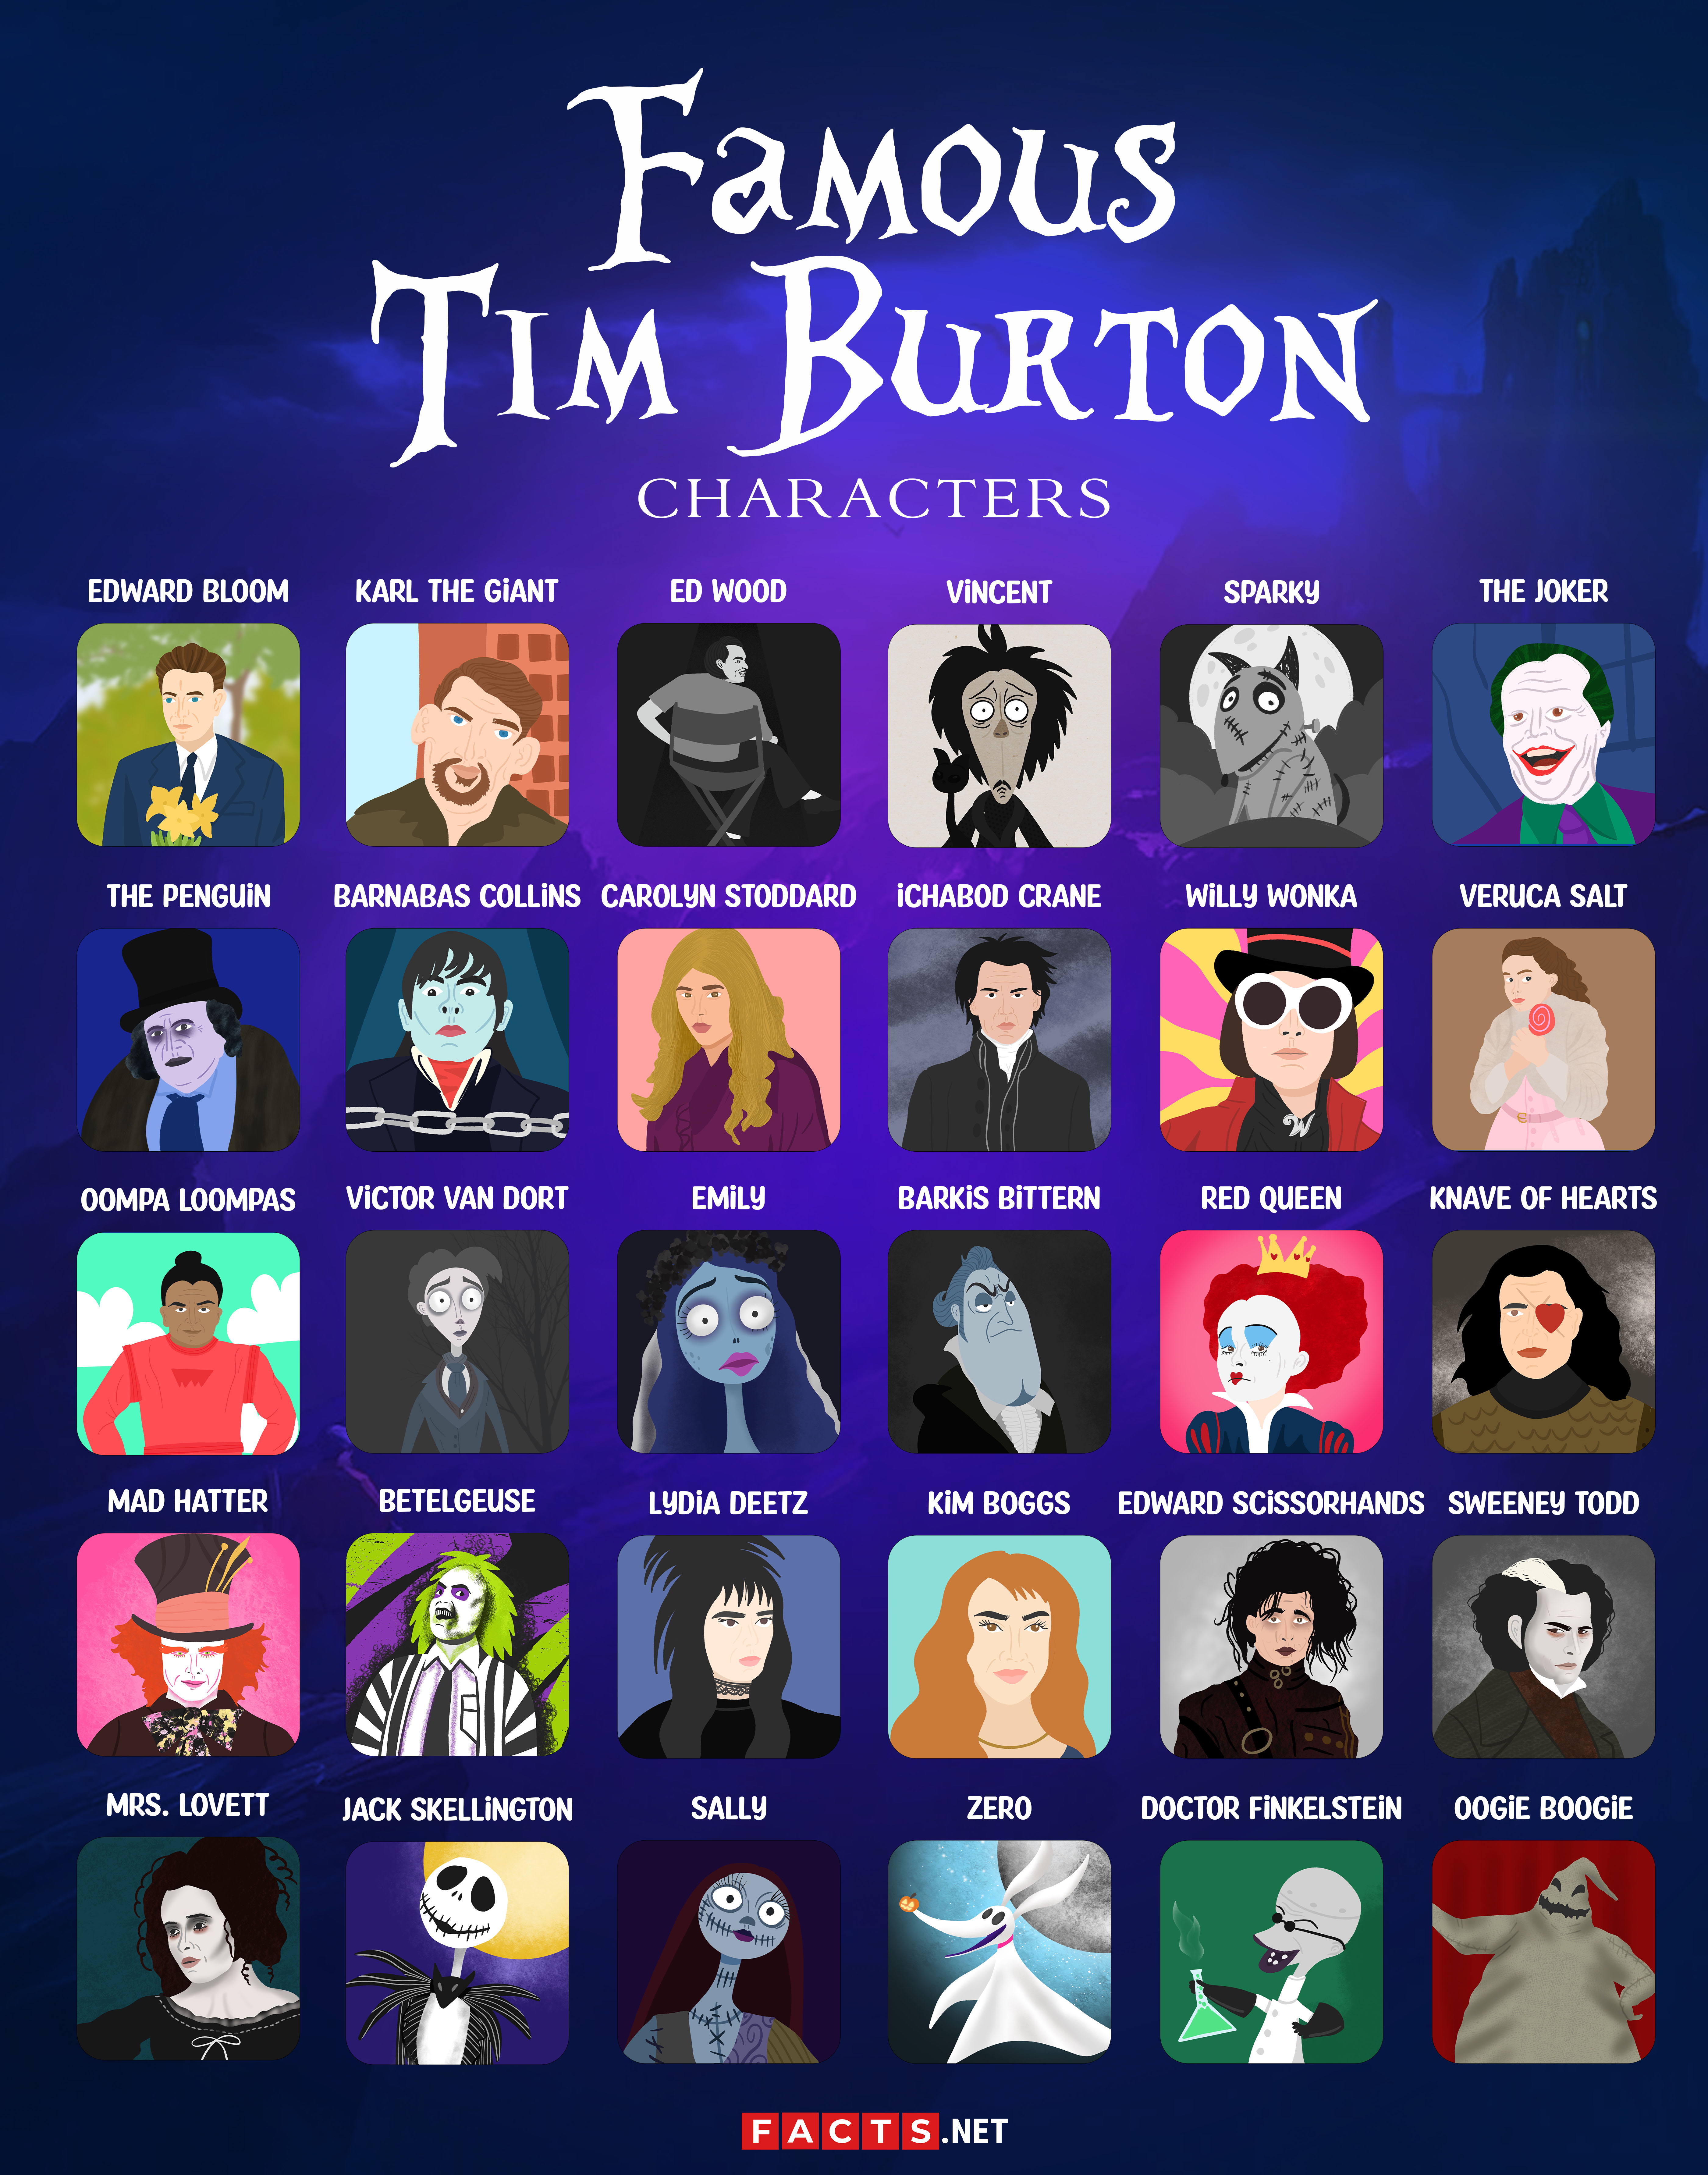 List of Tim Burton Characters - Facts.net